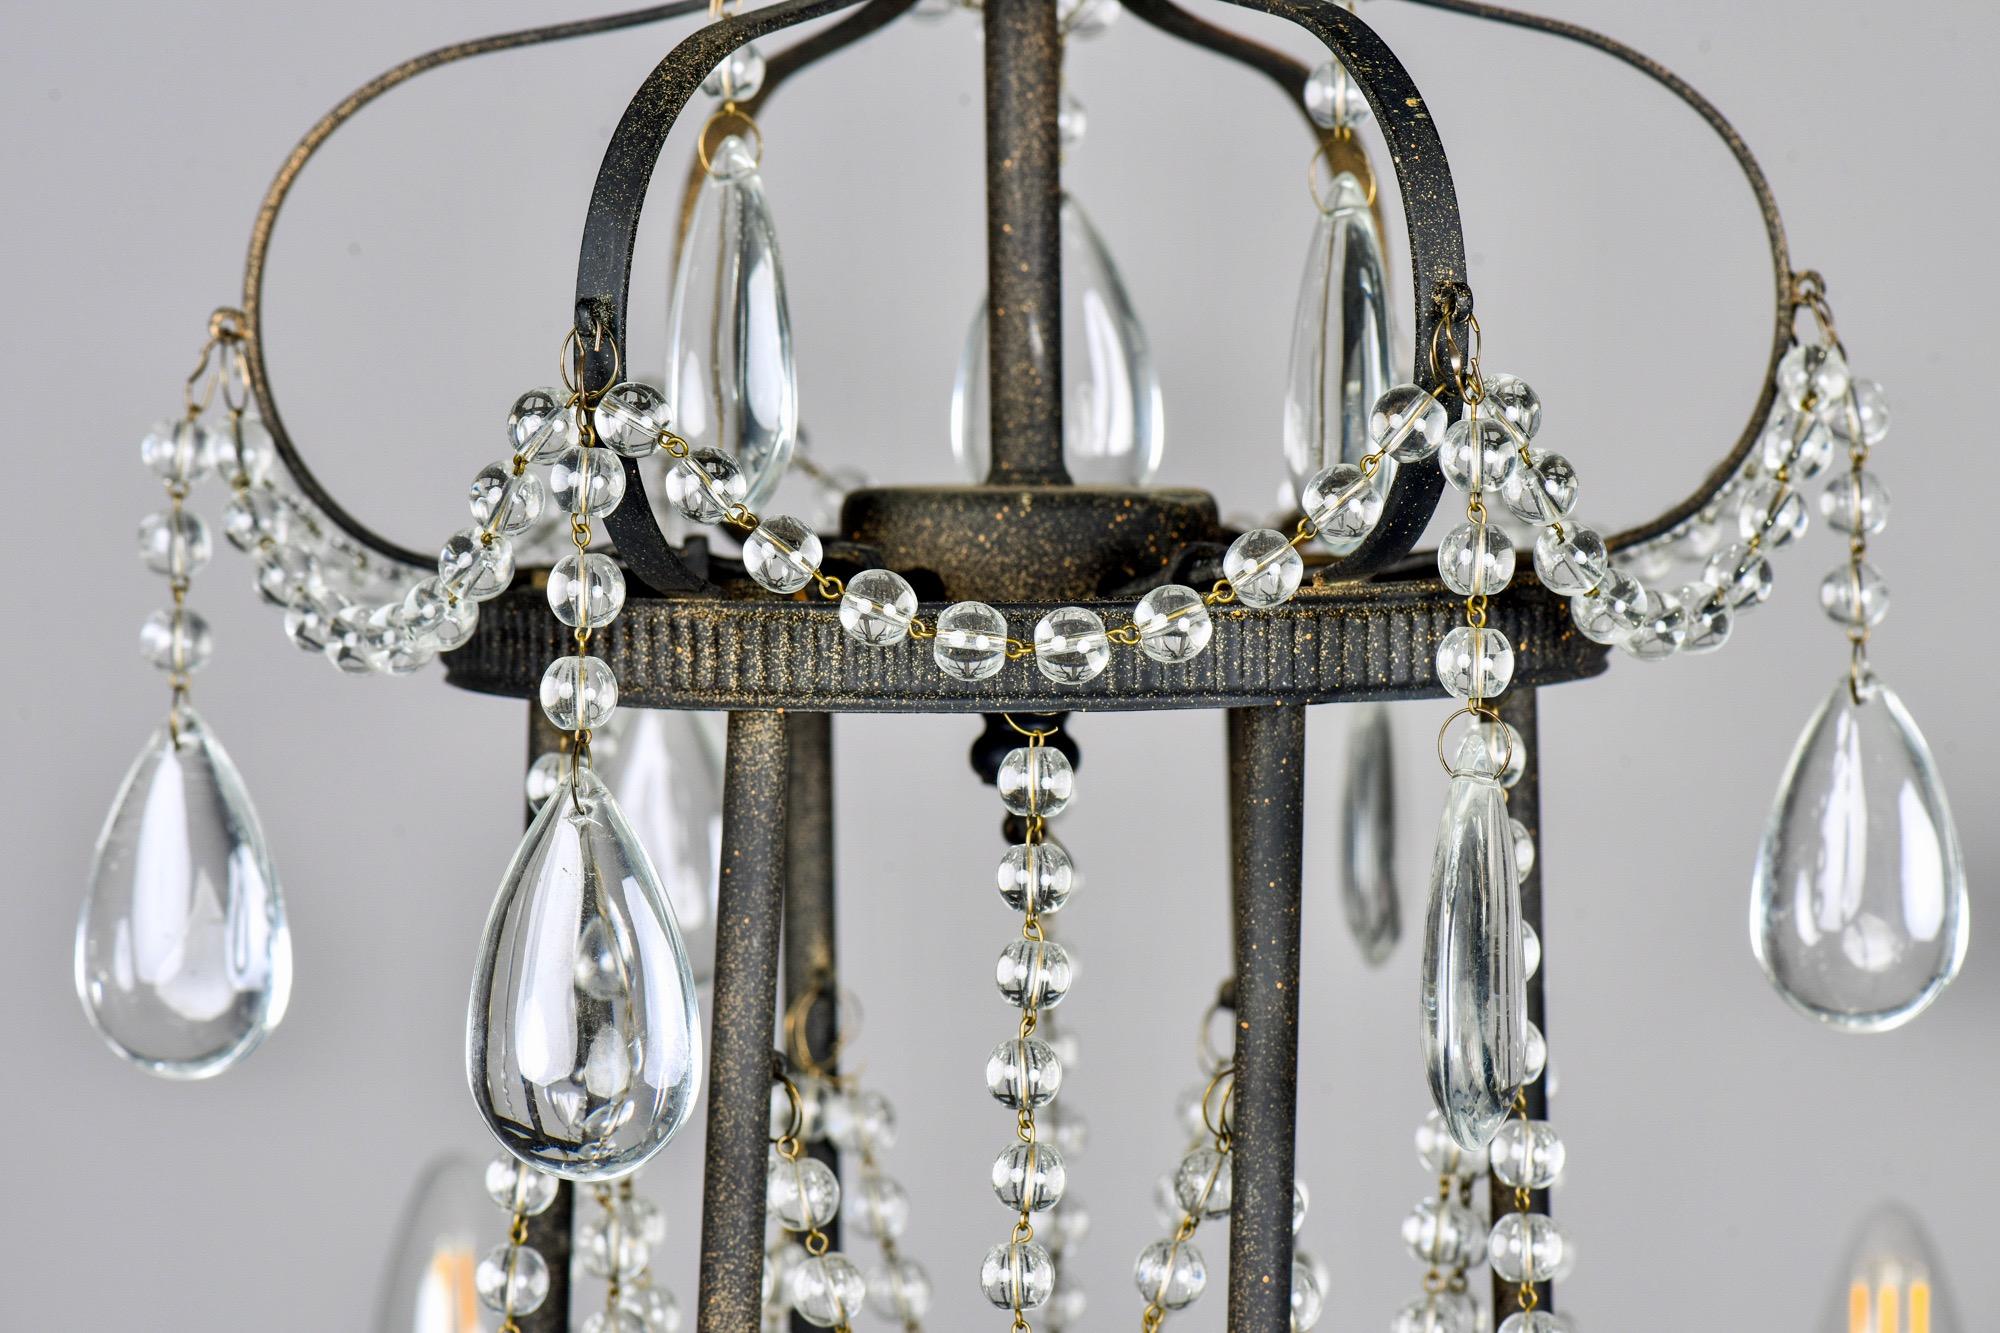 Contemporary Six-Arm Iron and Crystal Chandelier